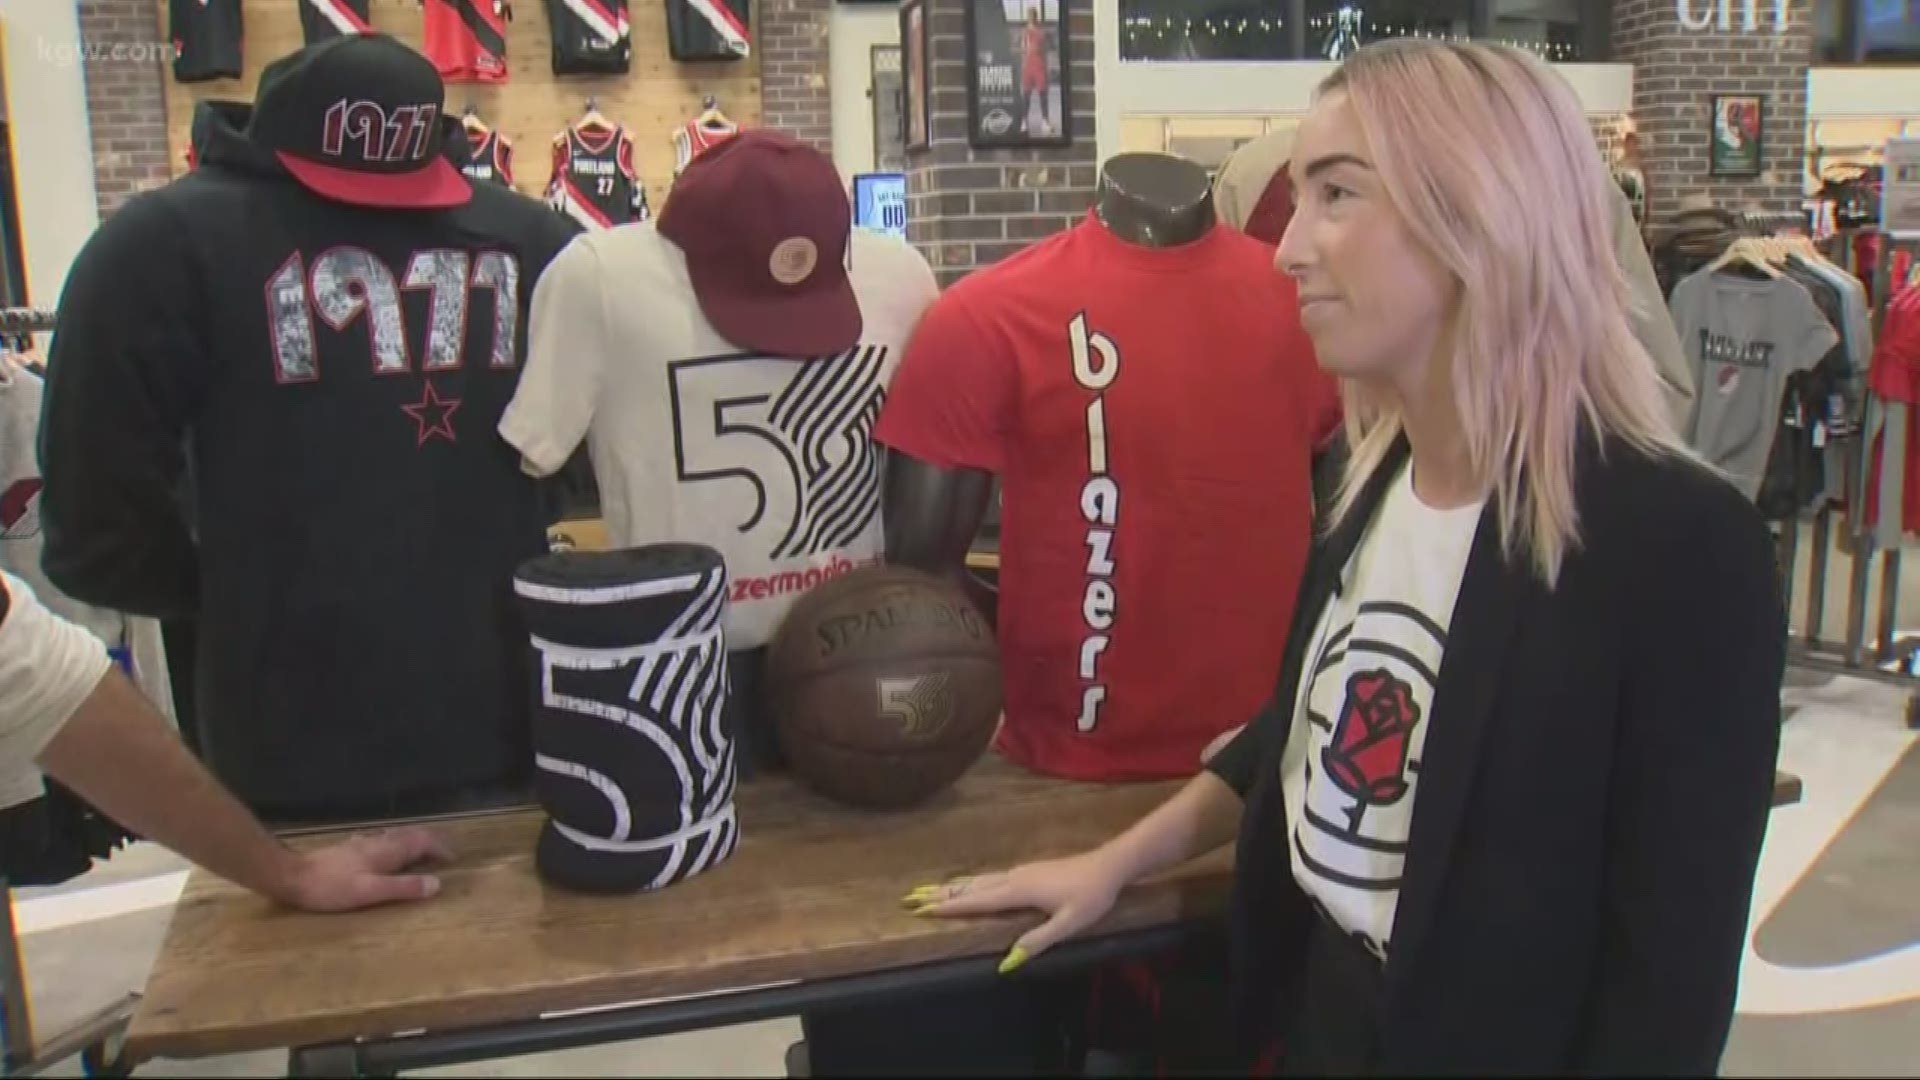 The Blazers turn 50 this year and nostalgia-centered apparel will be a big seller.